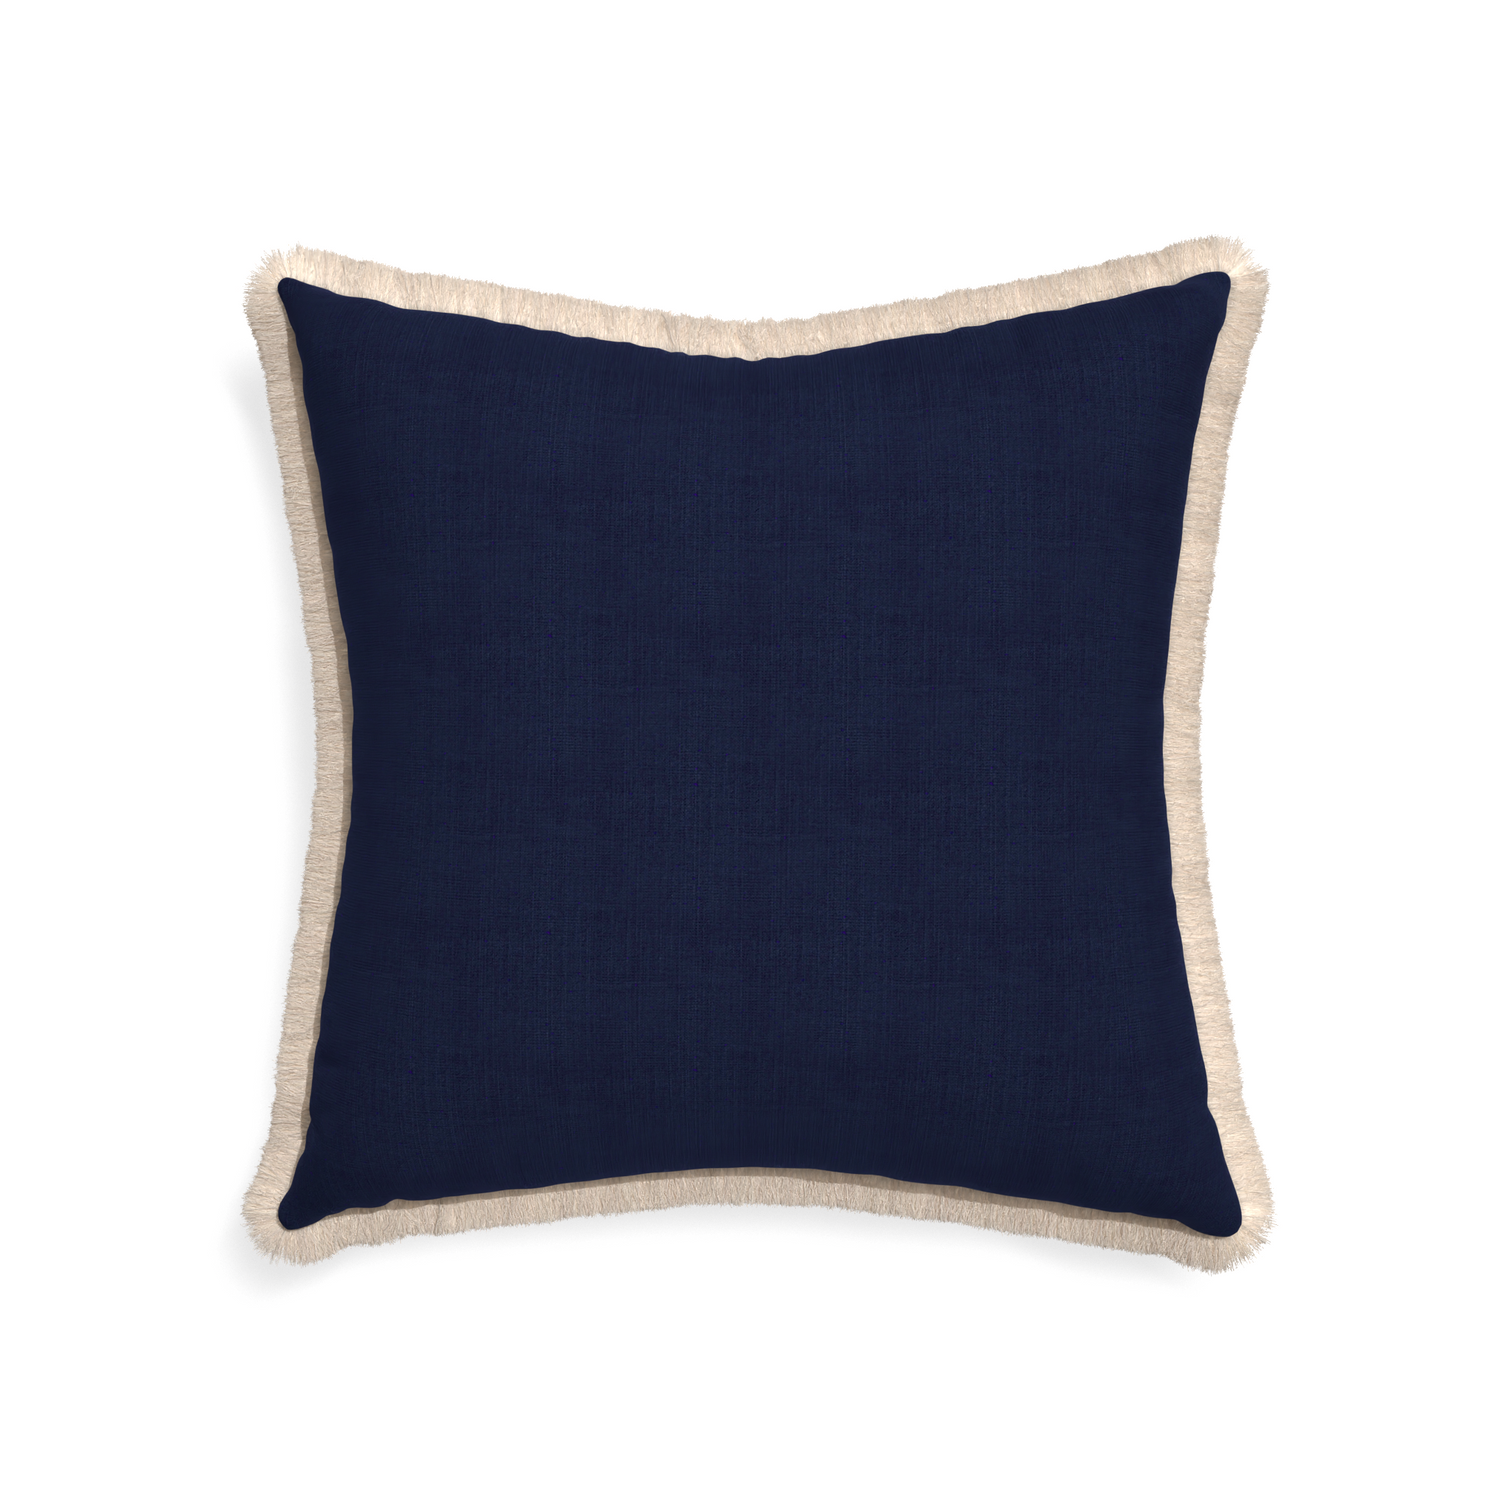 22-square midnight custom navy bluepillow with cream fringe on white background